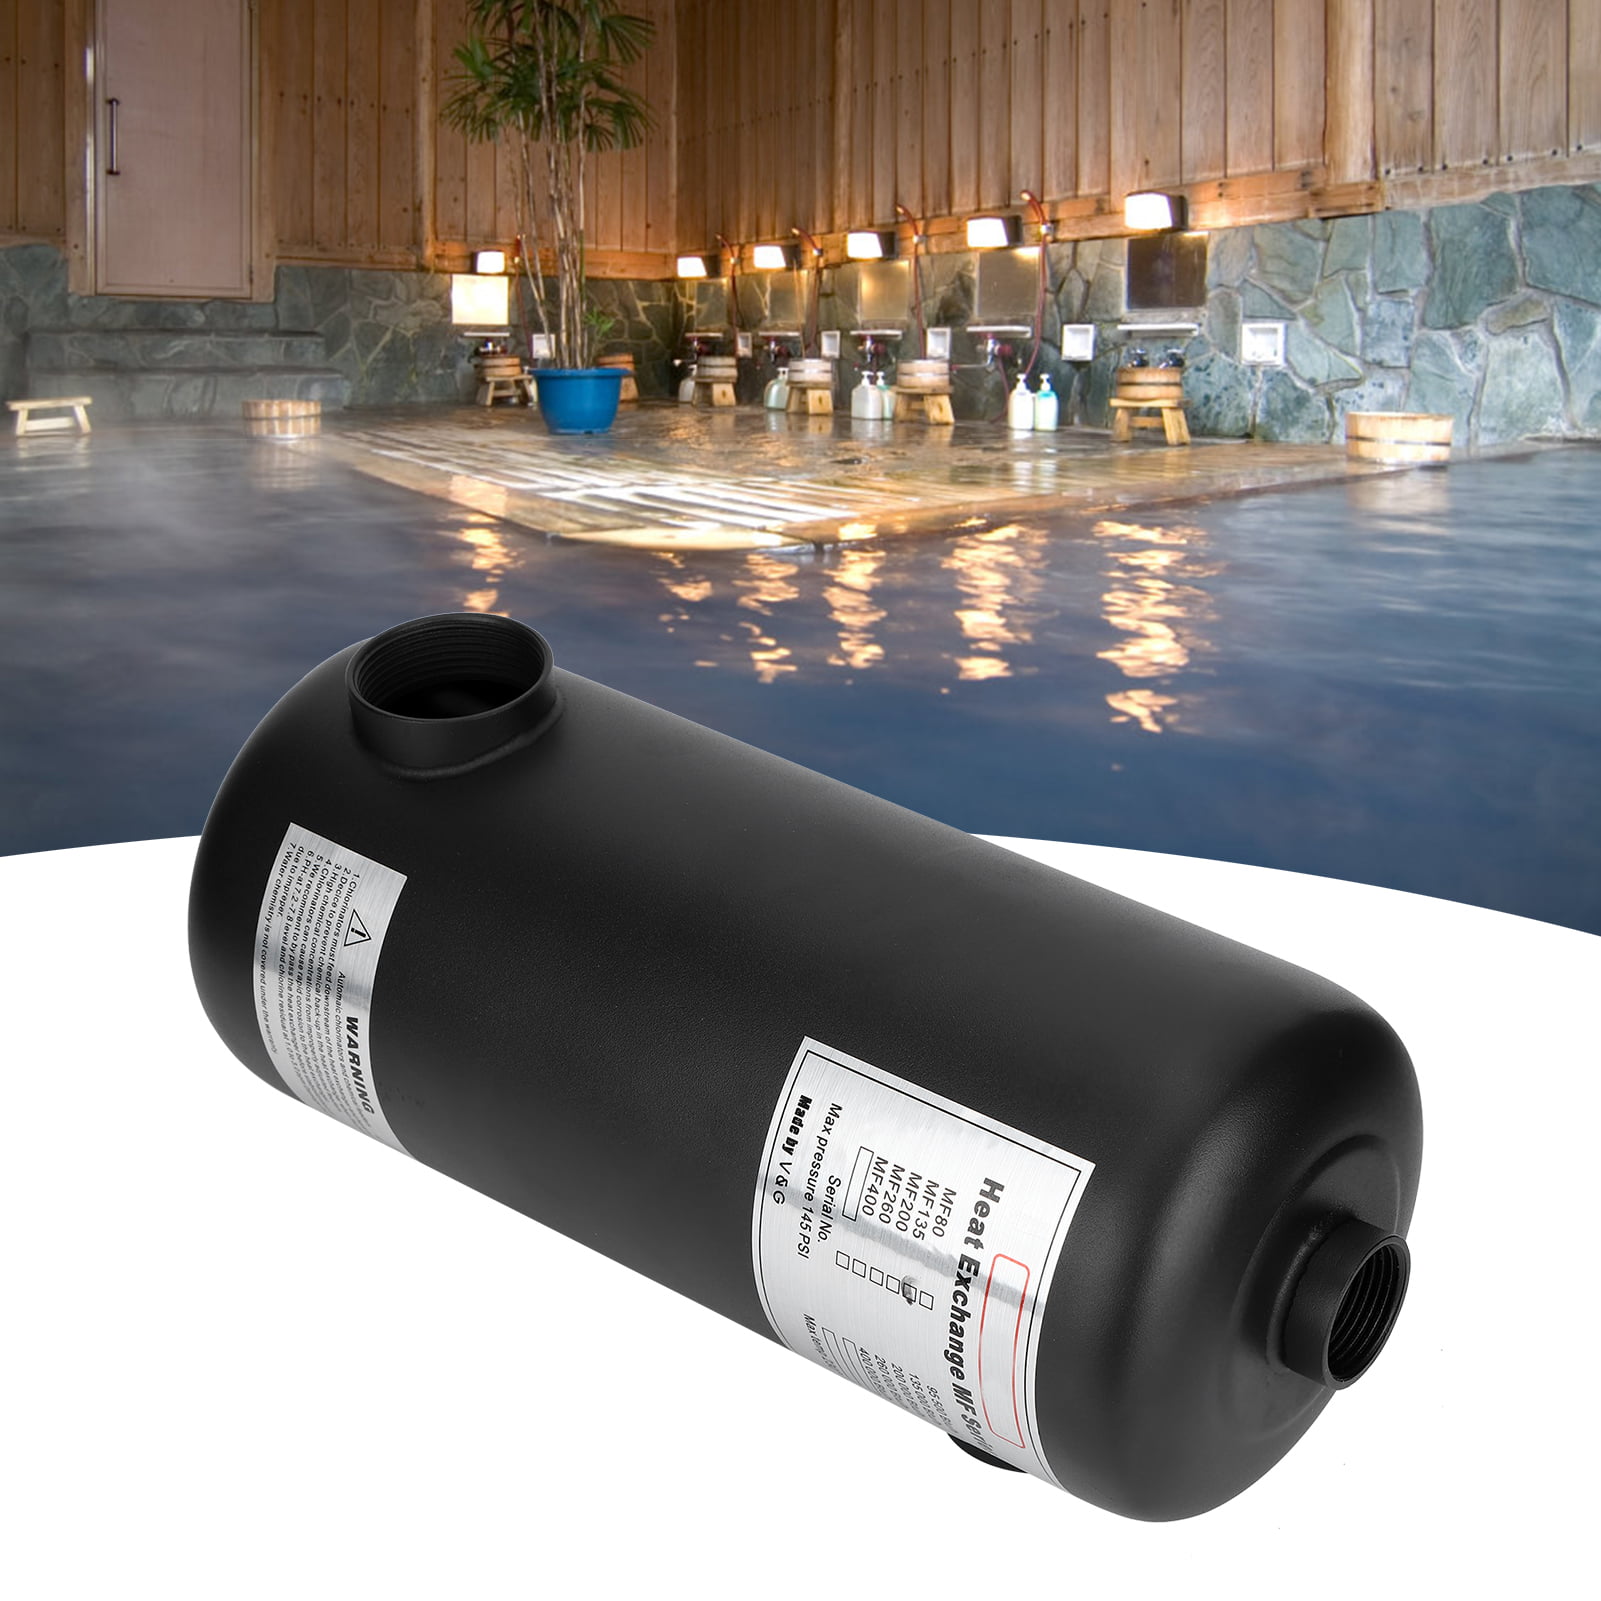 Details about   Tubular Heat Exchanger Thermostatic Equipment for Pool Hot Spring Pond Bathtub 